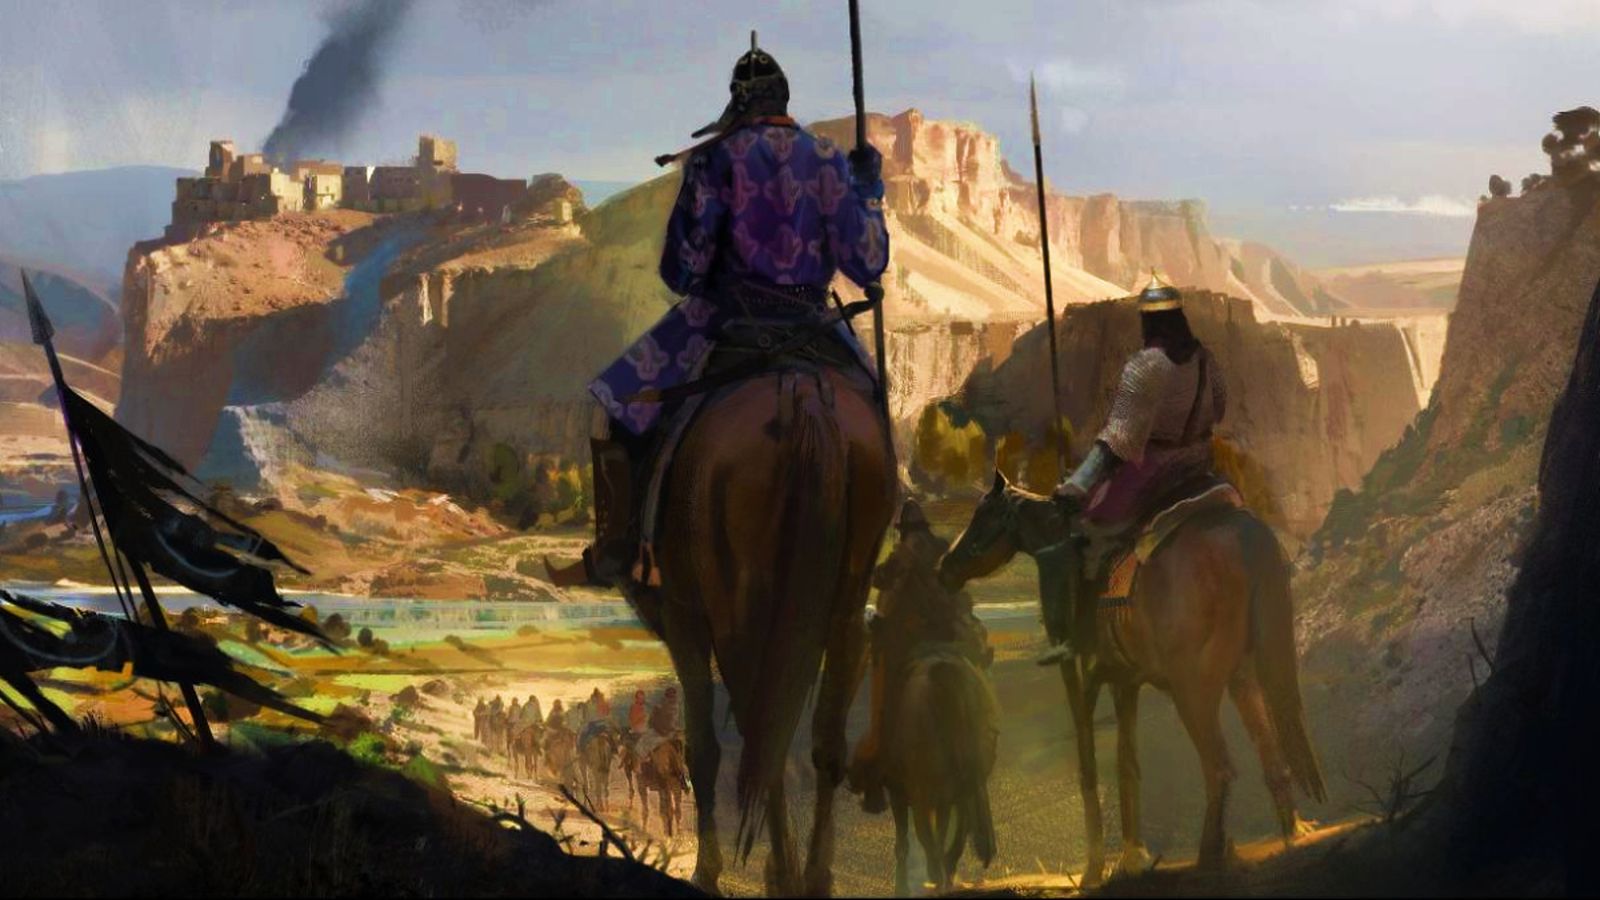 Crusader Kings 3 Persian soldiers on horses, riding towards a castle on a hill.